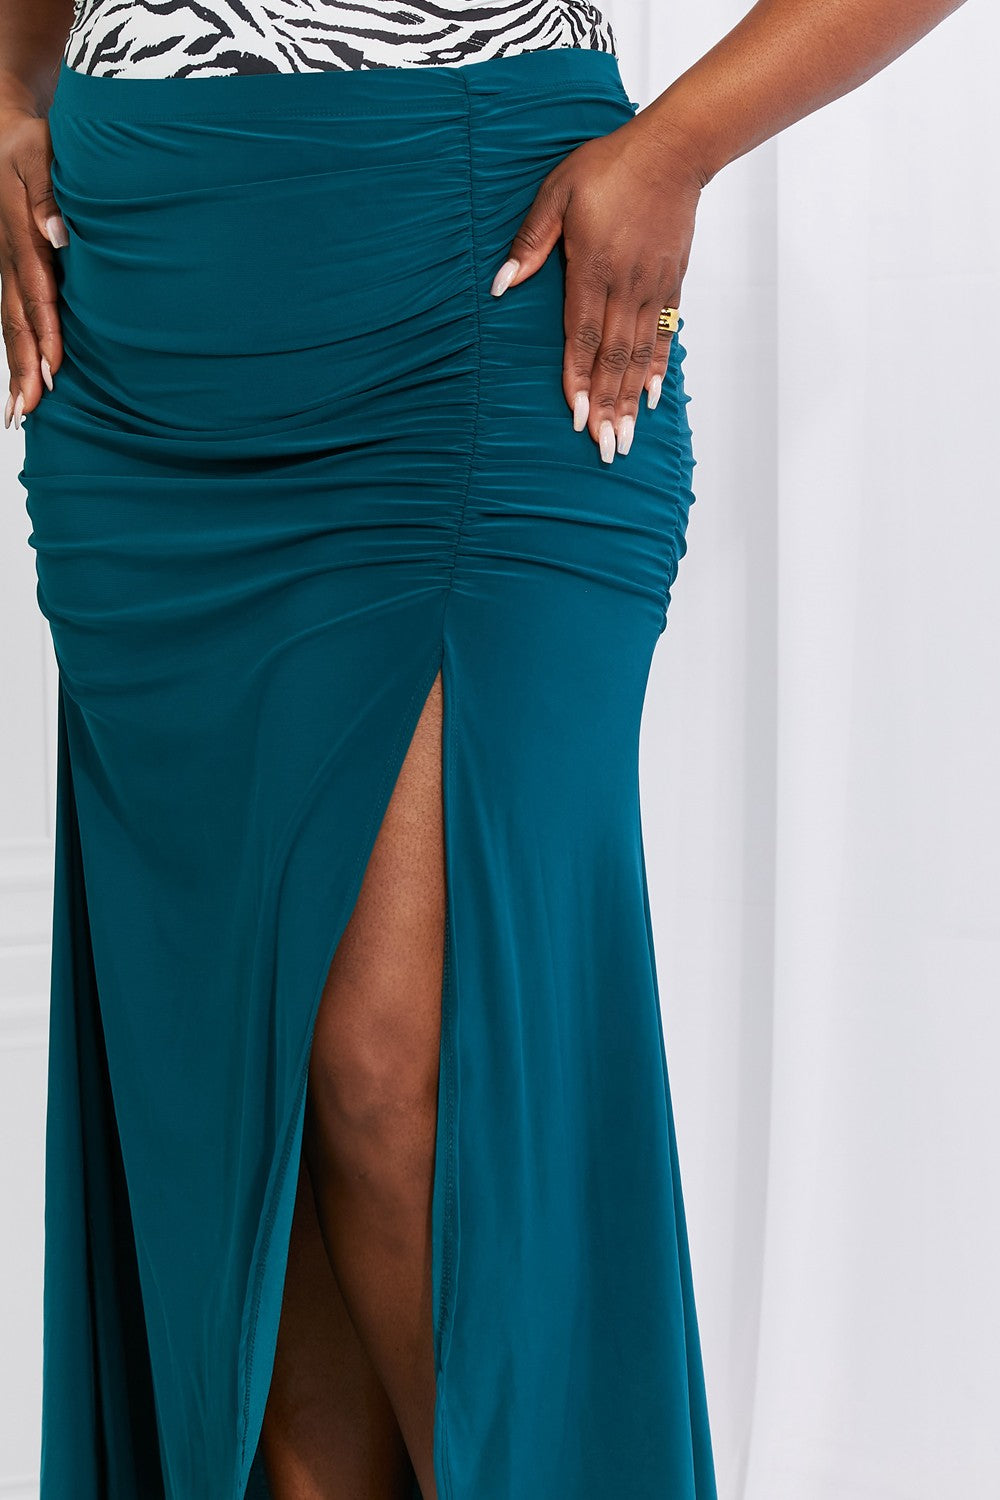 Full Size Up and Up Ruched Slit Maxi Skirt in Teal - Bottoms - Skirts - 9 - 2024